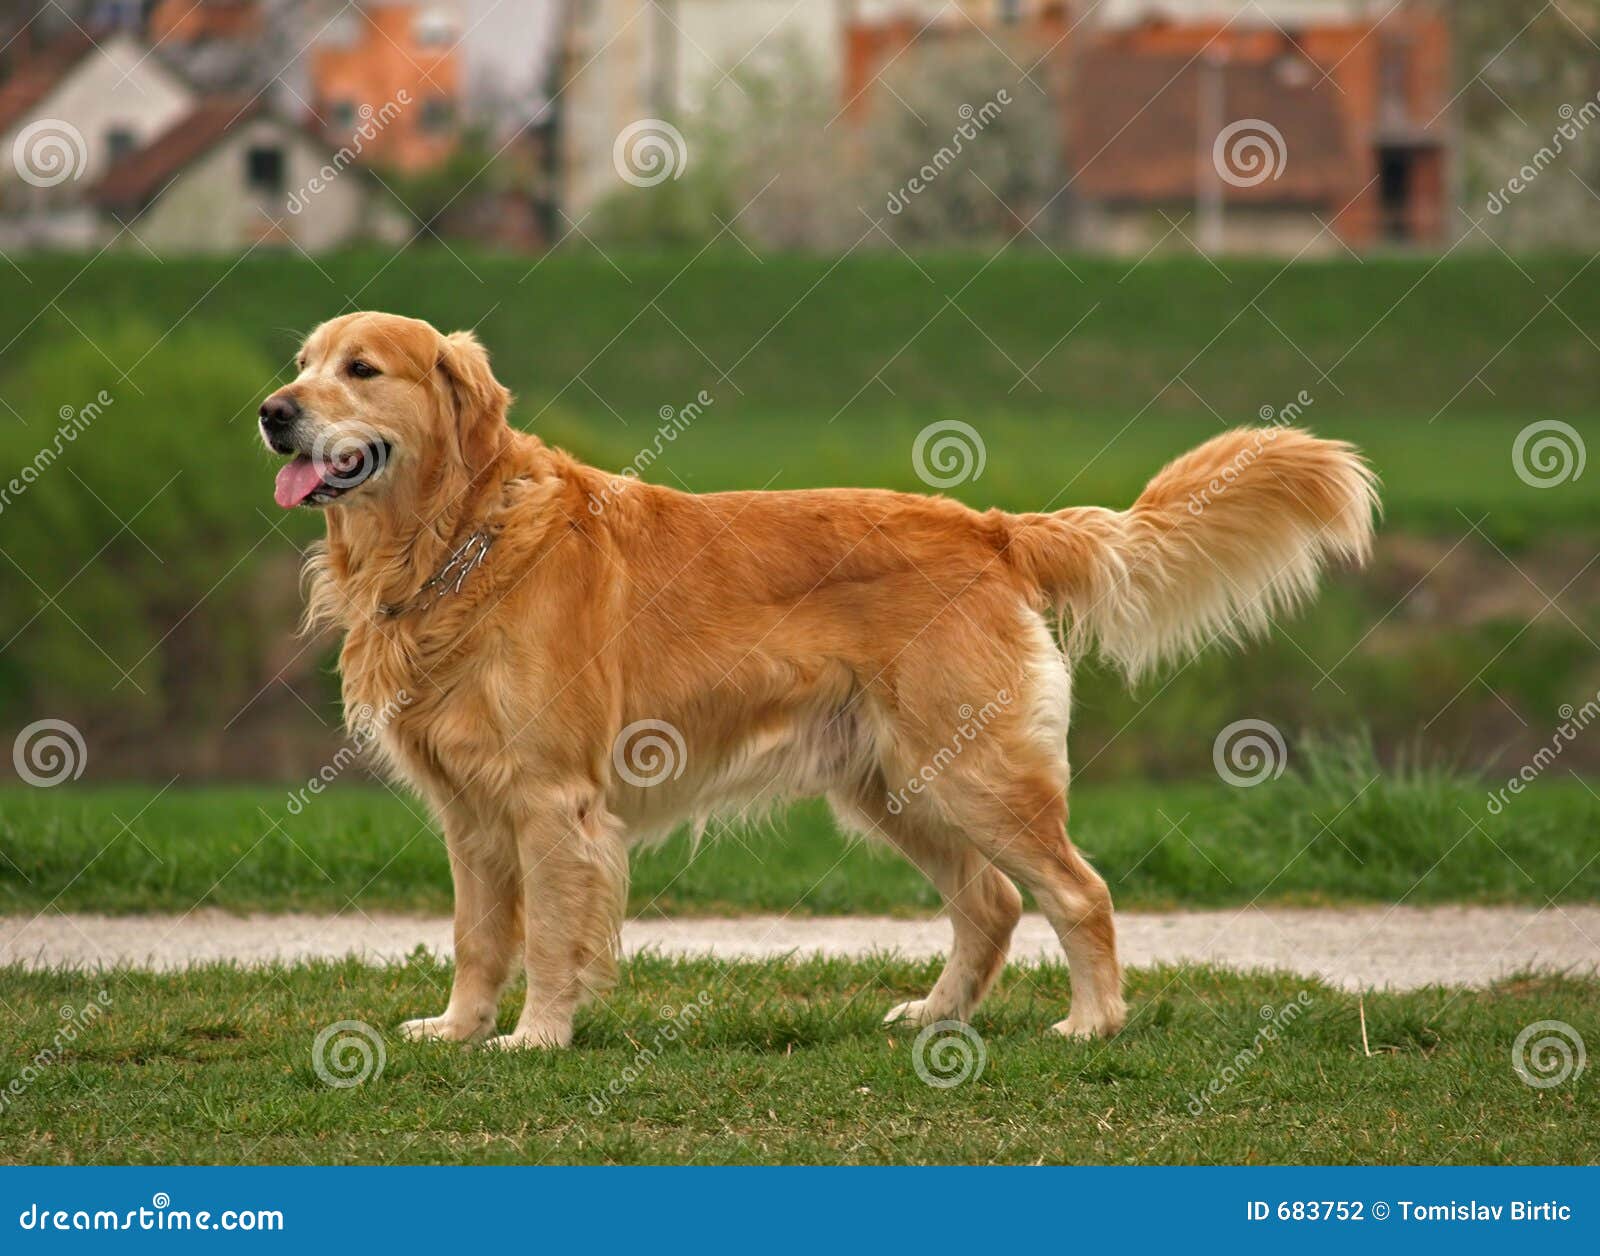 Get full field bred golden retriever puppies for sale